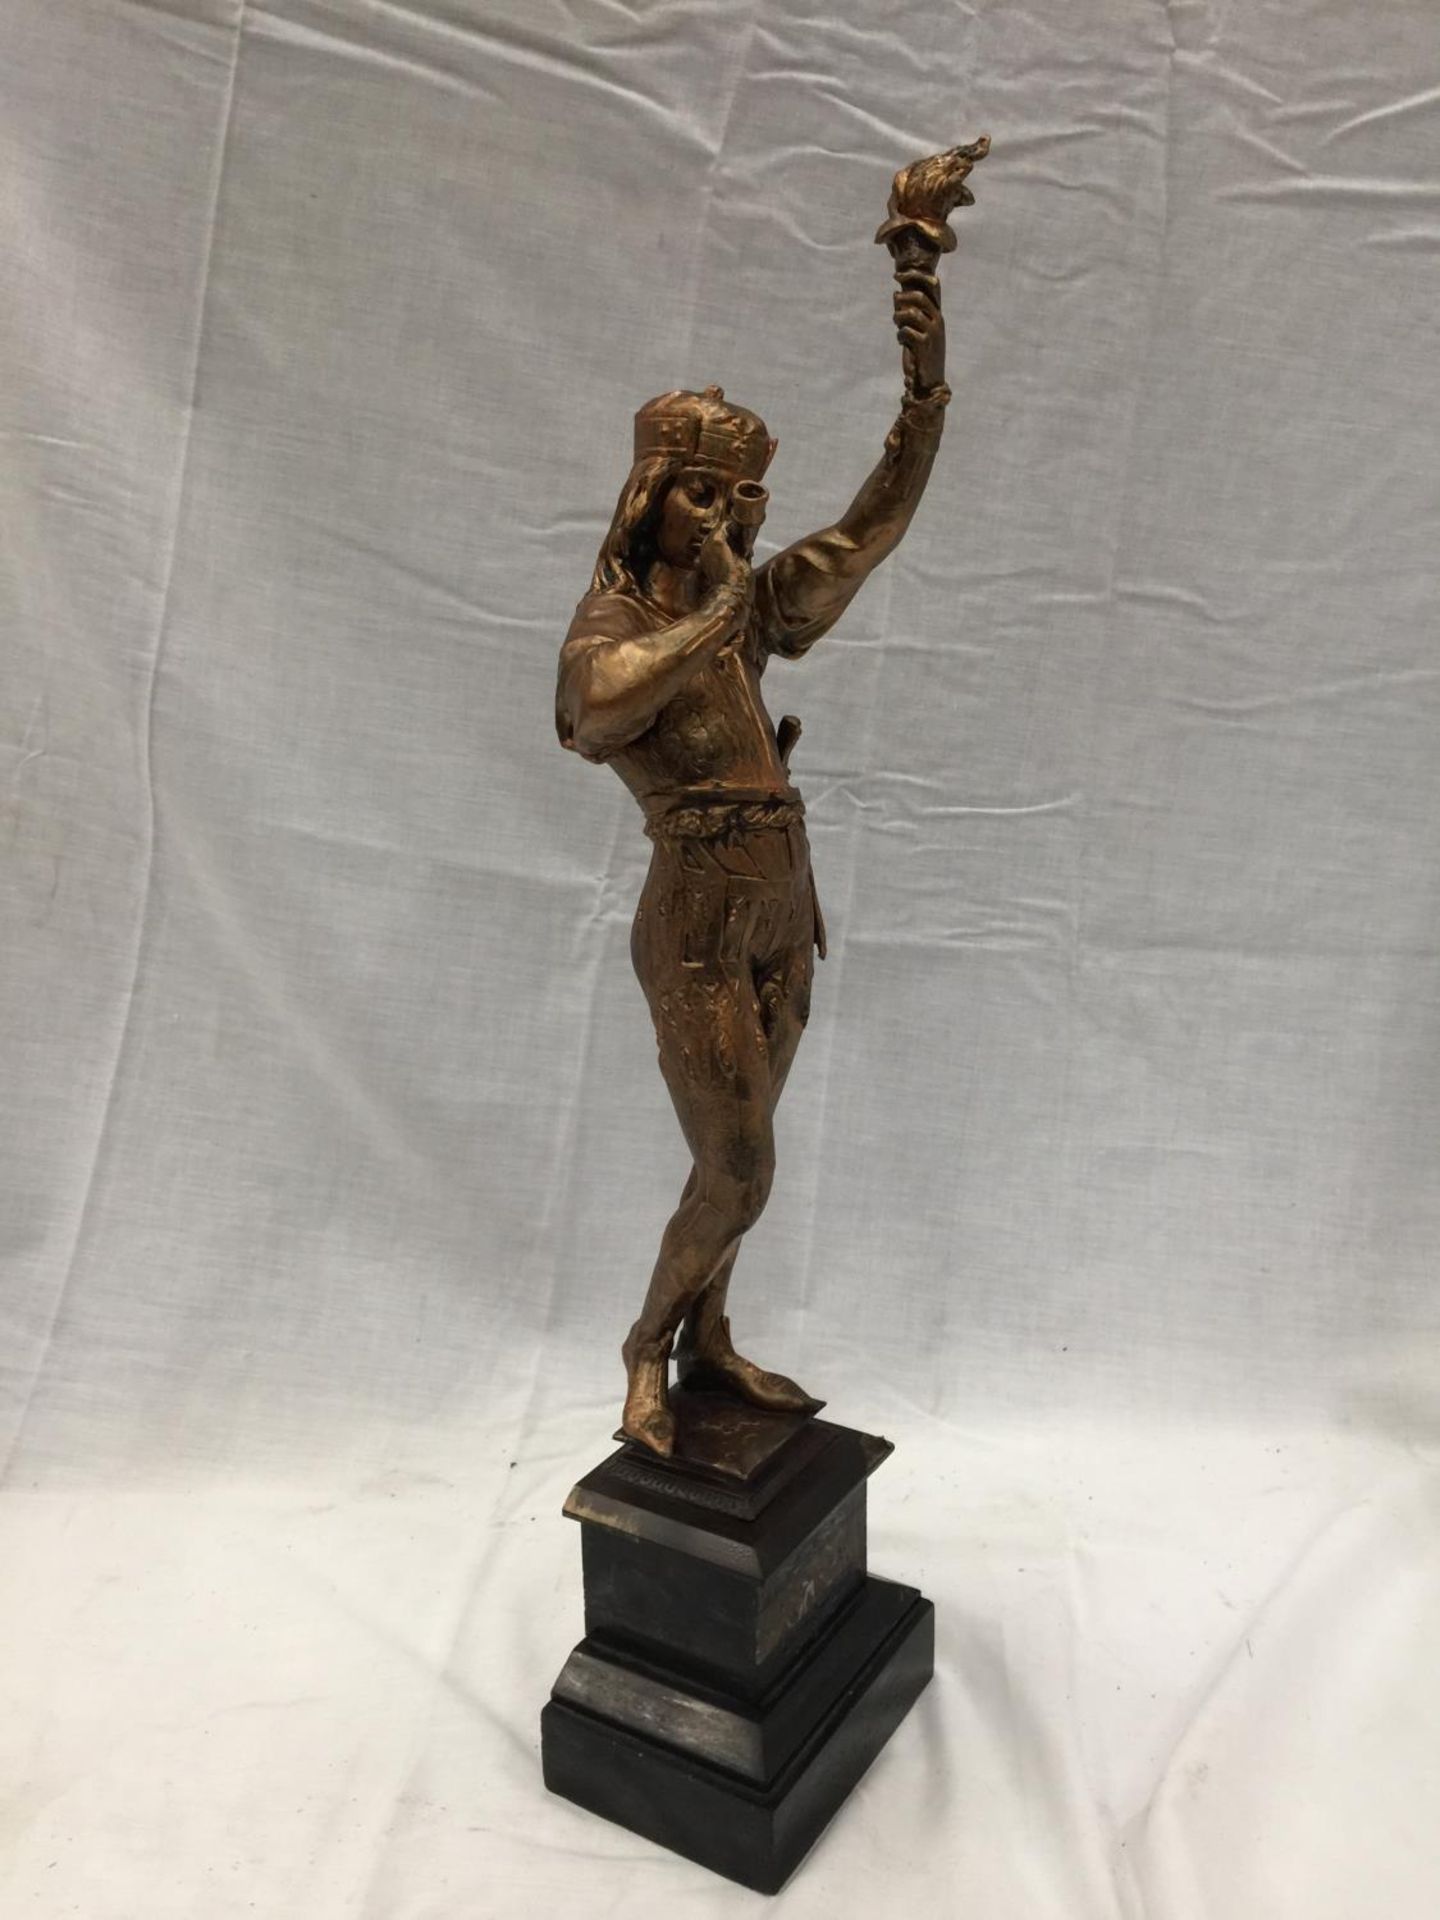 A METAL STATUETTE OF A CLASSICAL FIGURE ON A PLINT HEIGHT 60CM - Image 5 of 12